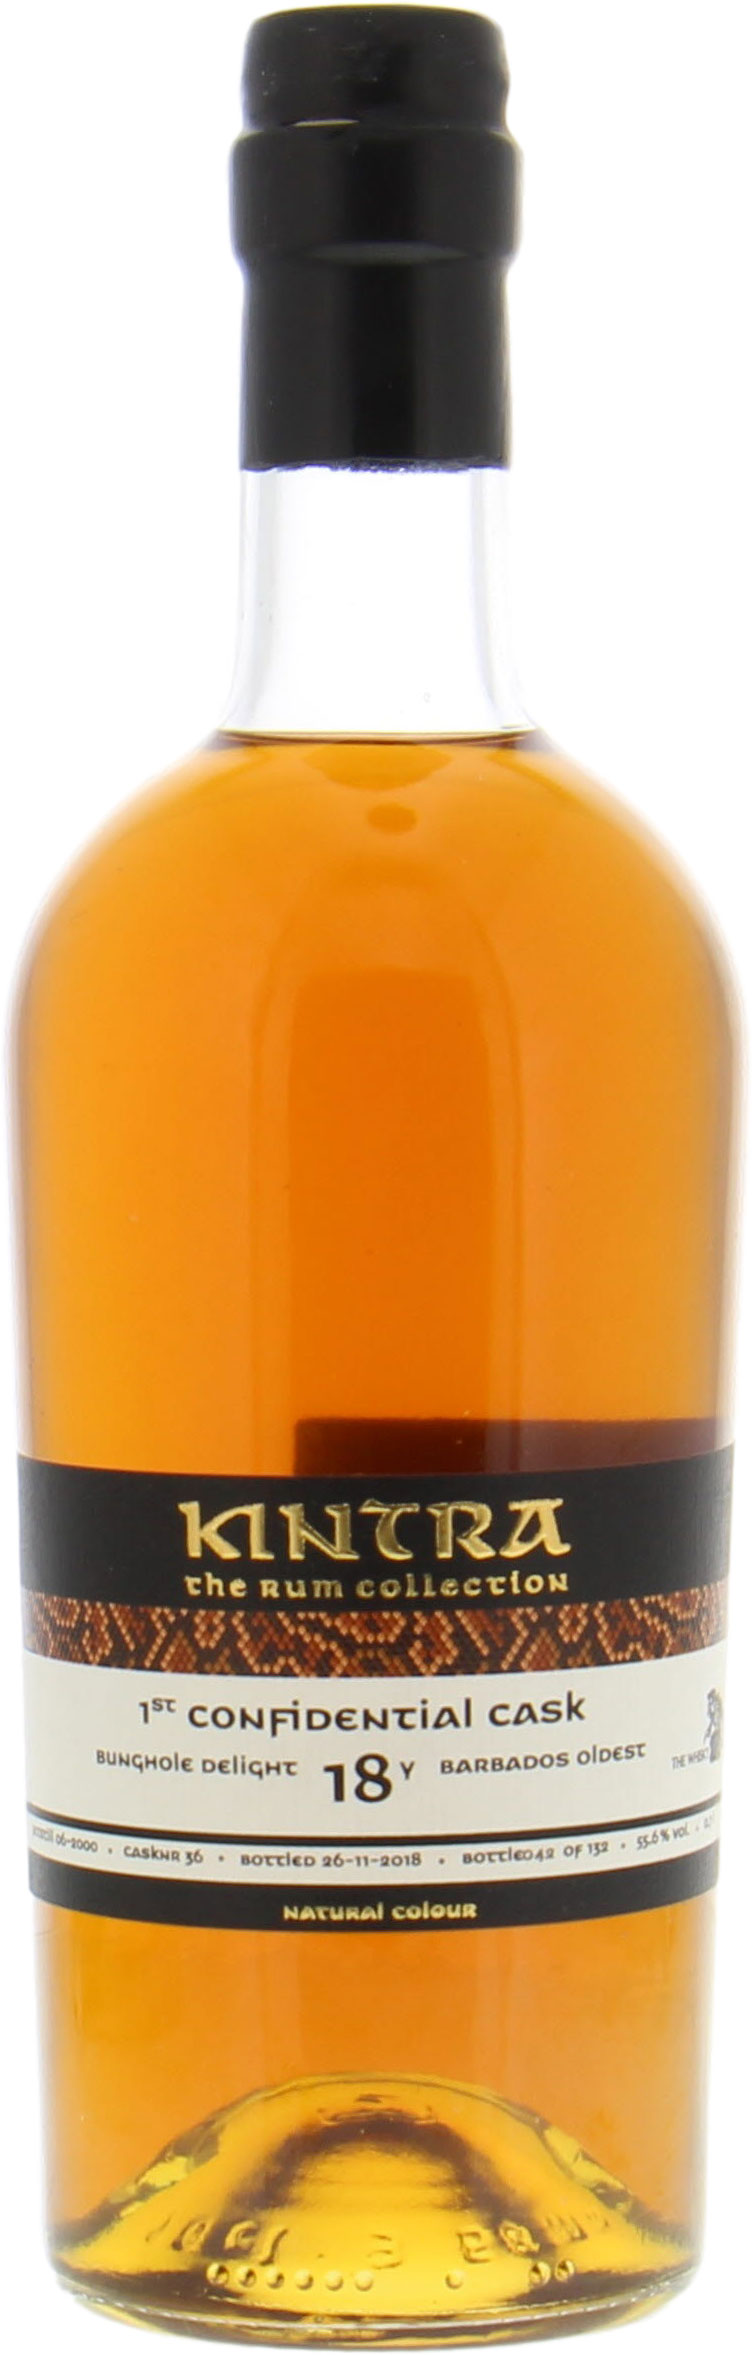 MG Barbados Oldest - 18 Years Old Bunghole Delight Kintra Confidential Cask 36 55.6% 2000 Perfect